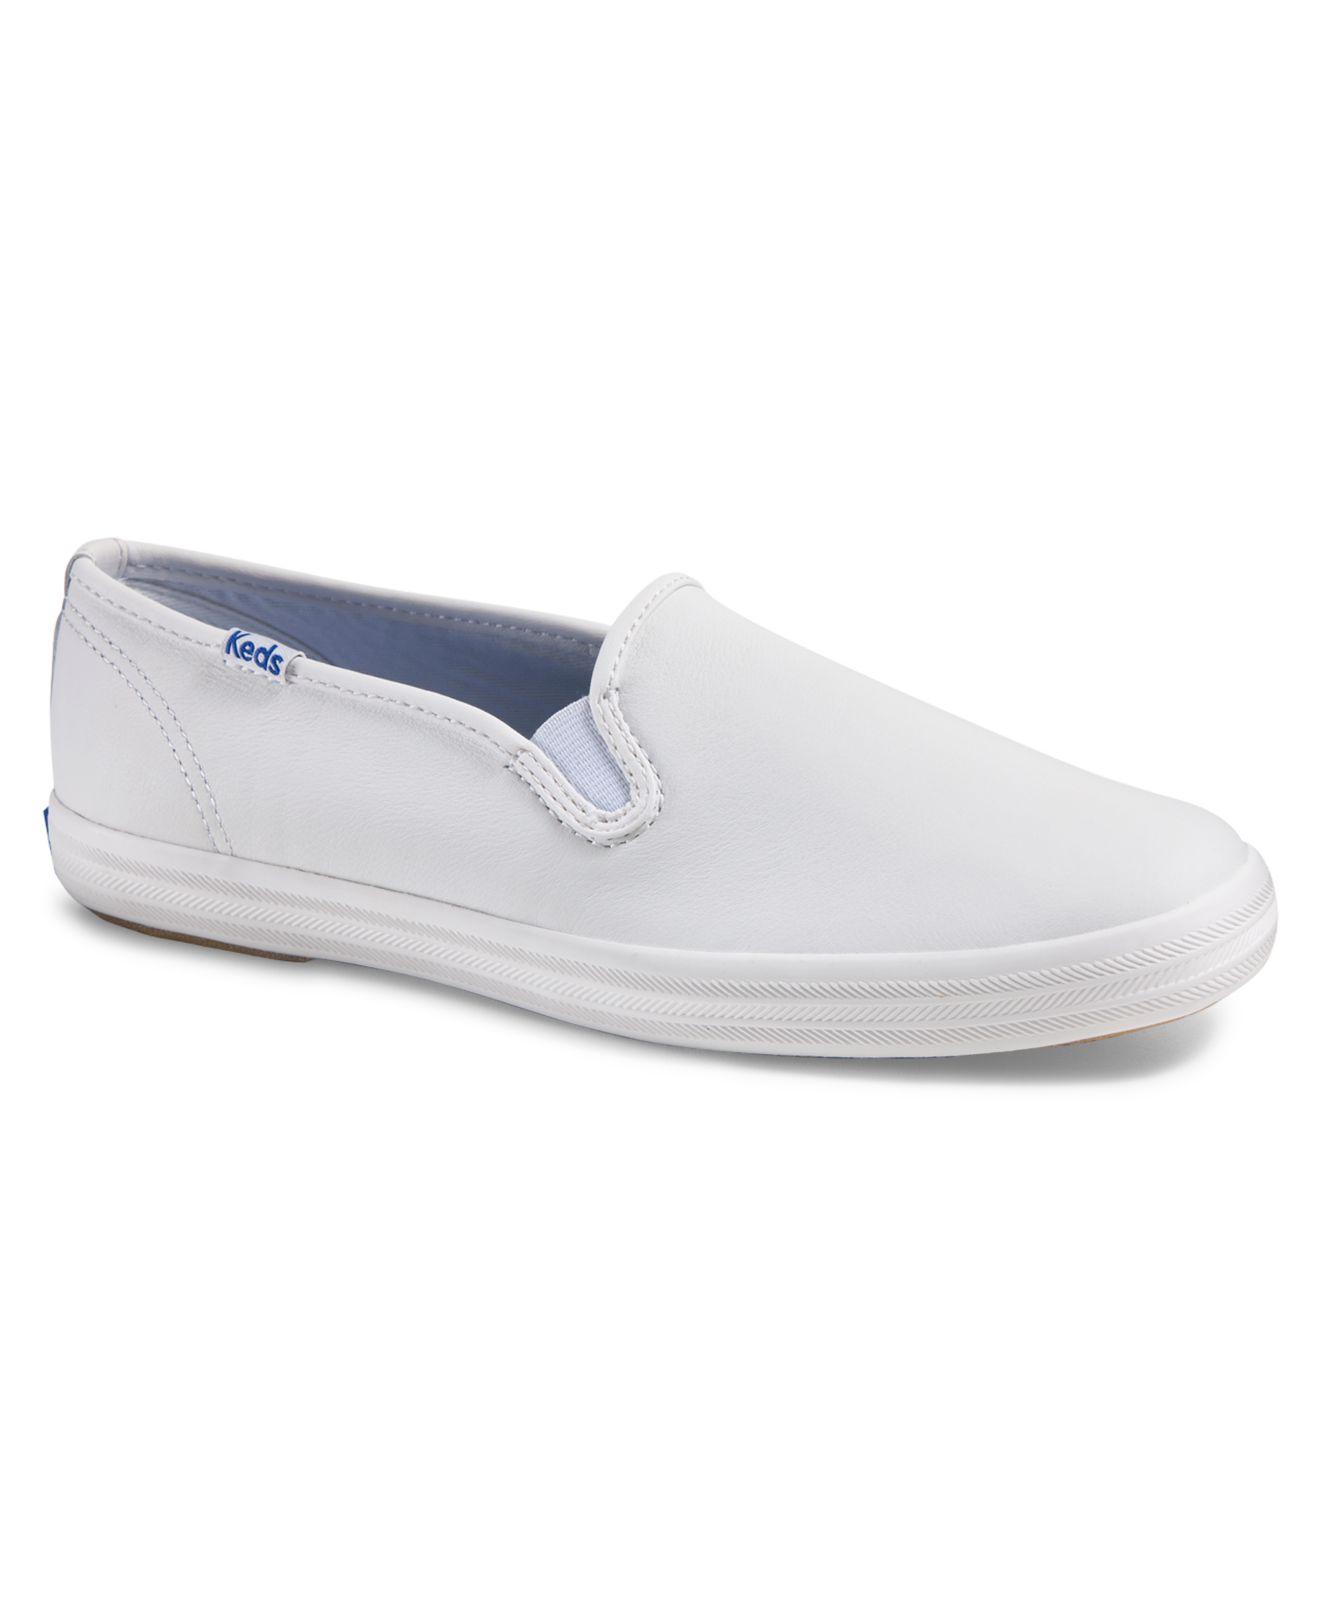 Keds Champion Slip On Leather Sneakers in White - Lyst